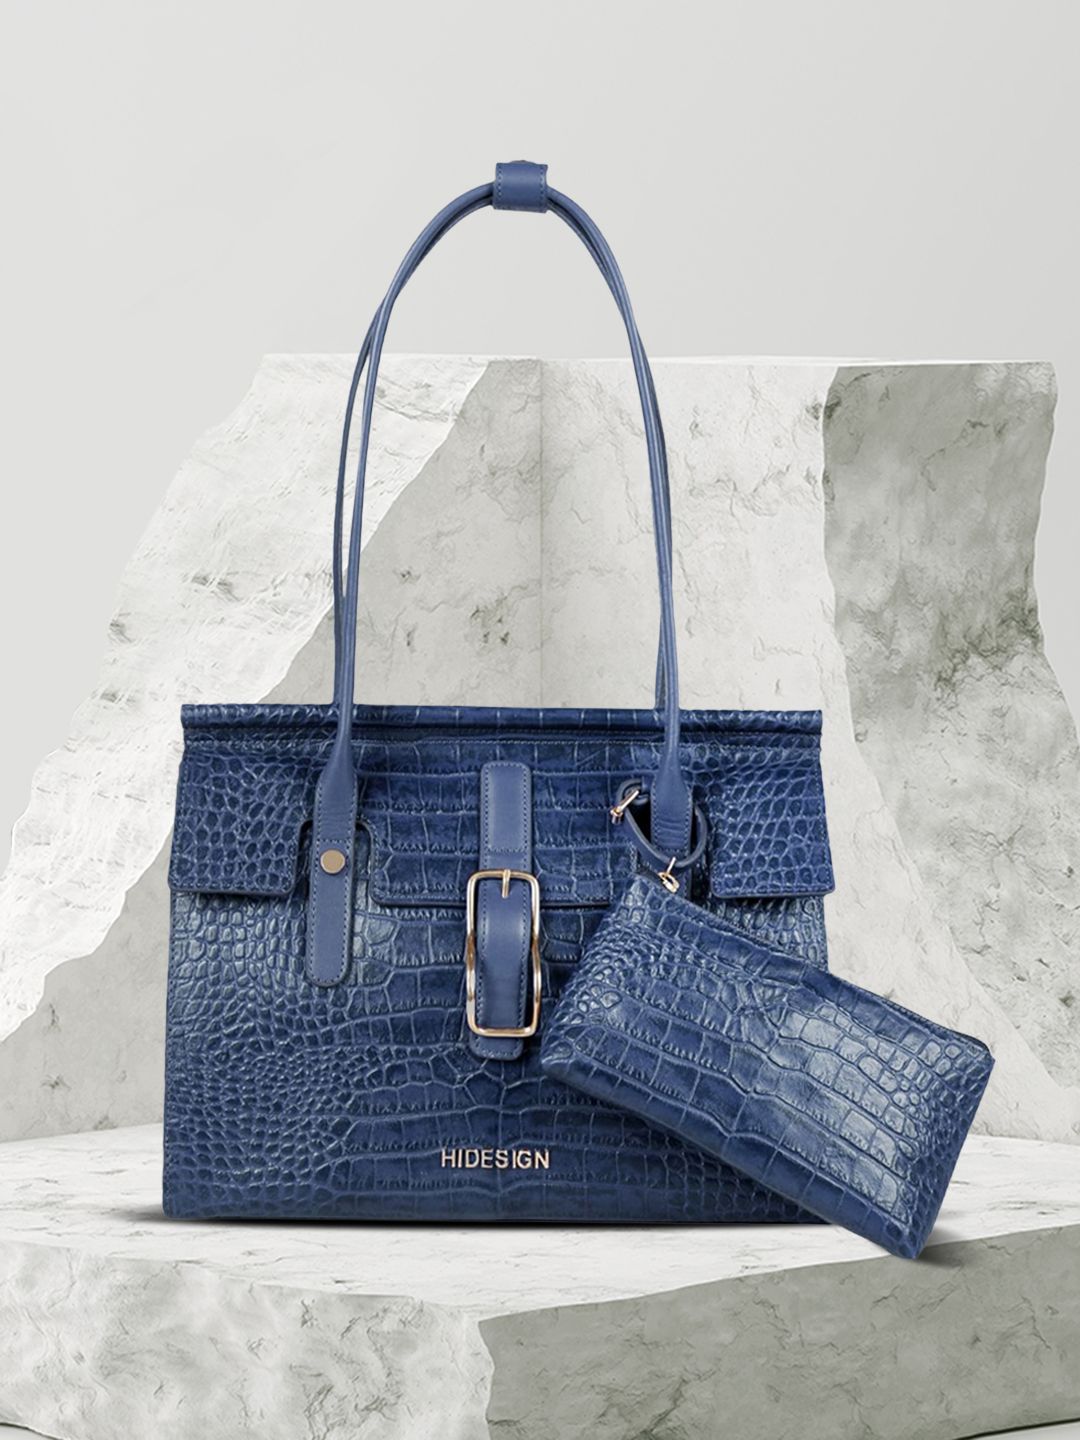 Hidesign Blue Animal Textured Leather Structured Handheld Bag Price in India